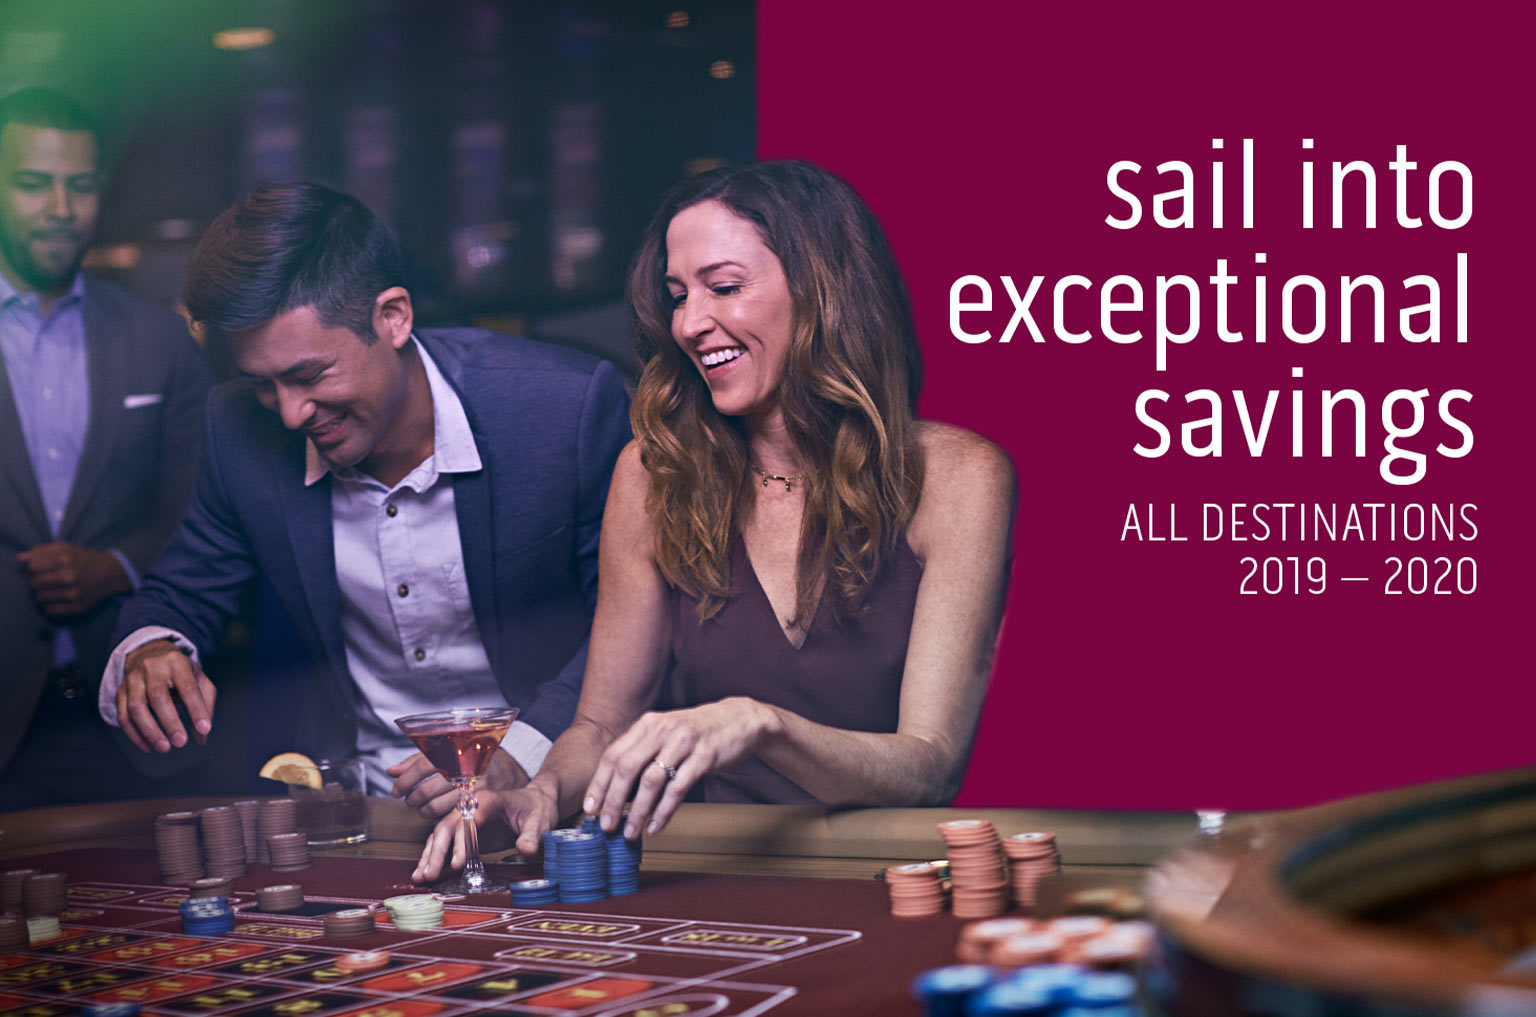 Sail into exceptional savings - all destinations 2019-2020